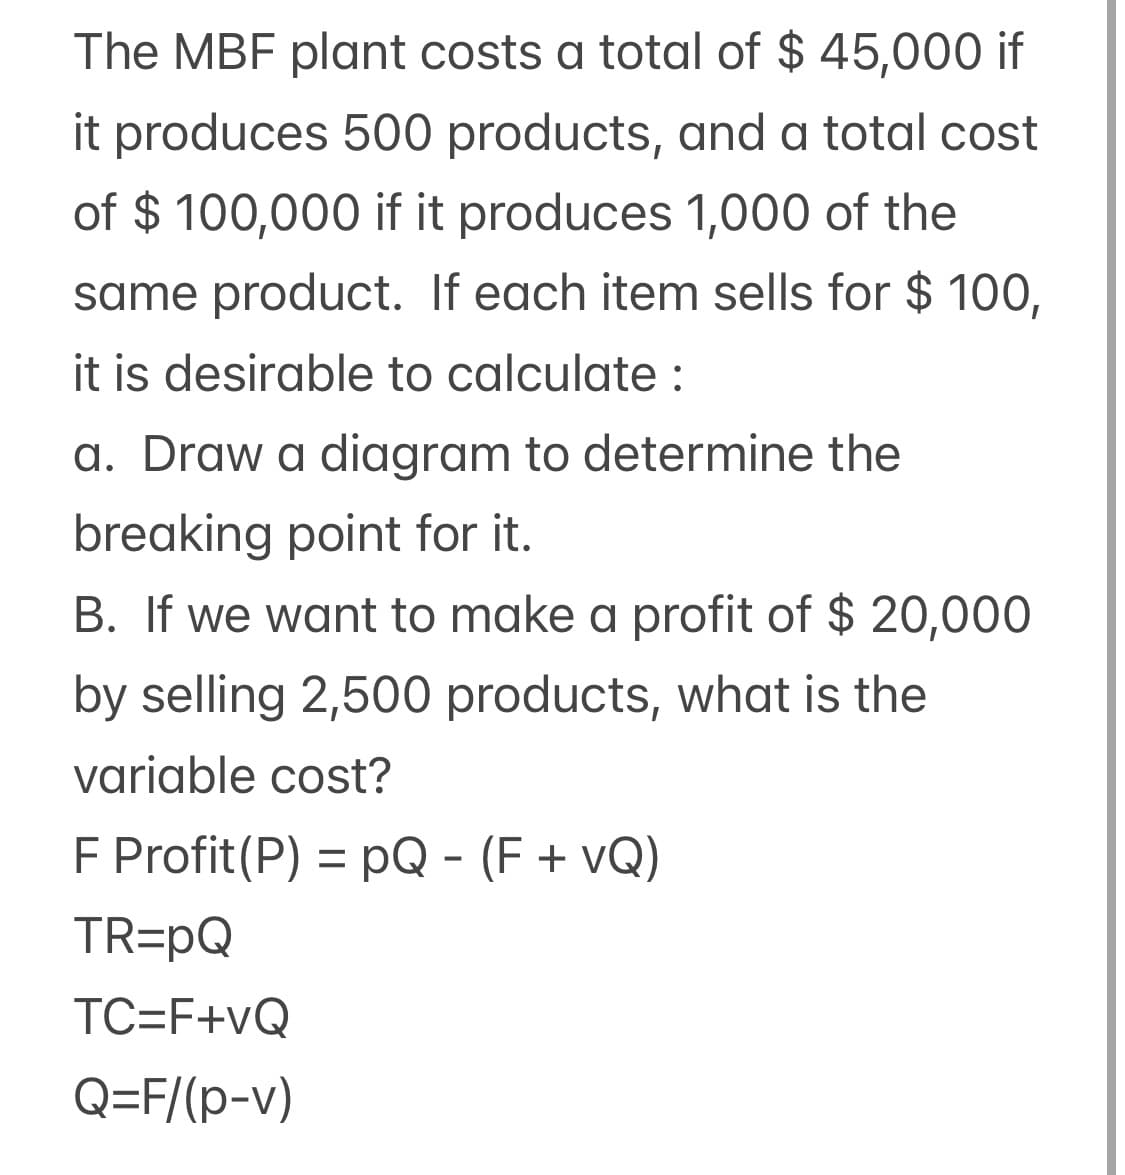 The MBF plant costs a total of $ 45,000 if
it produces 500 products, and a total cost
of $ 100,000 if it produces 1,000 of the
same product. If each item sells for $ 100,
it is desirable to calculate :
a. Draw a diagram to determine the
breaking point for it.
B. If we want to make a profit of $ 20,000
by selling 2,500 products, what is the
variable cost?
F Profit(P) = pQ - (F + vQ)
%3D
TR=pQ
TC=F+vQ
Q=F/(p-v)
